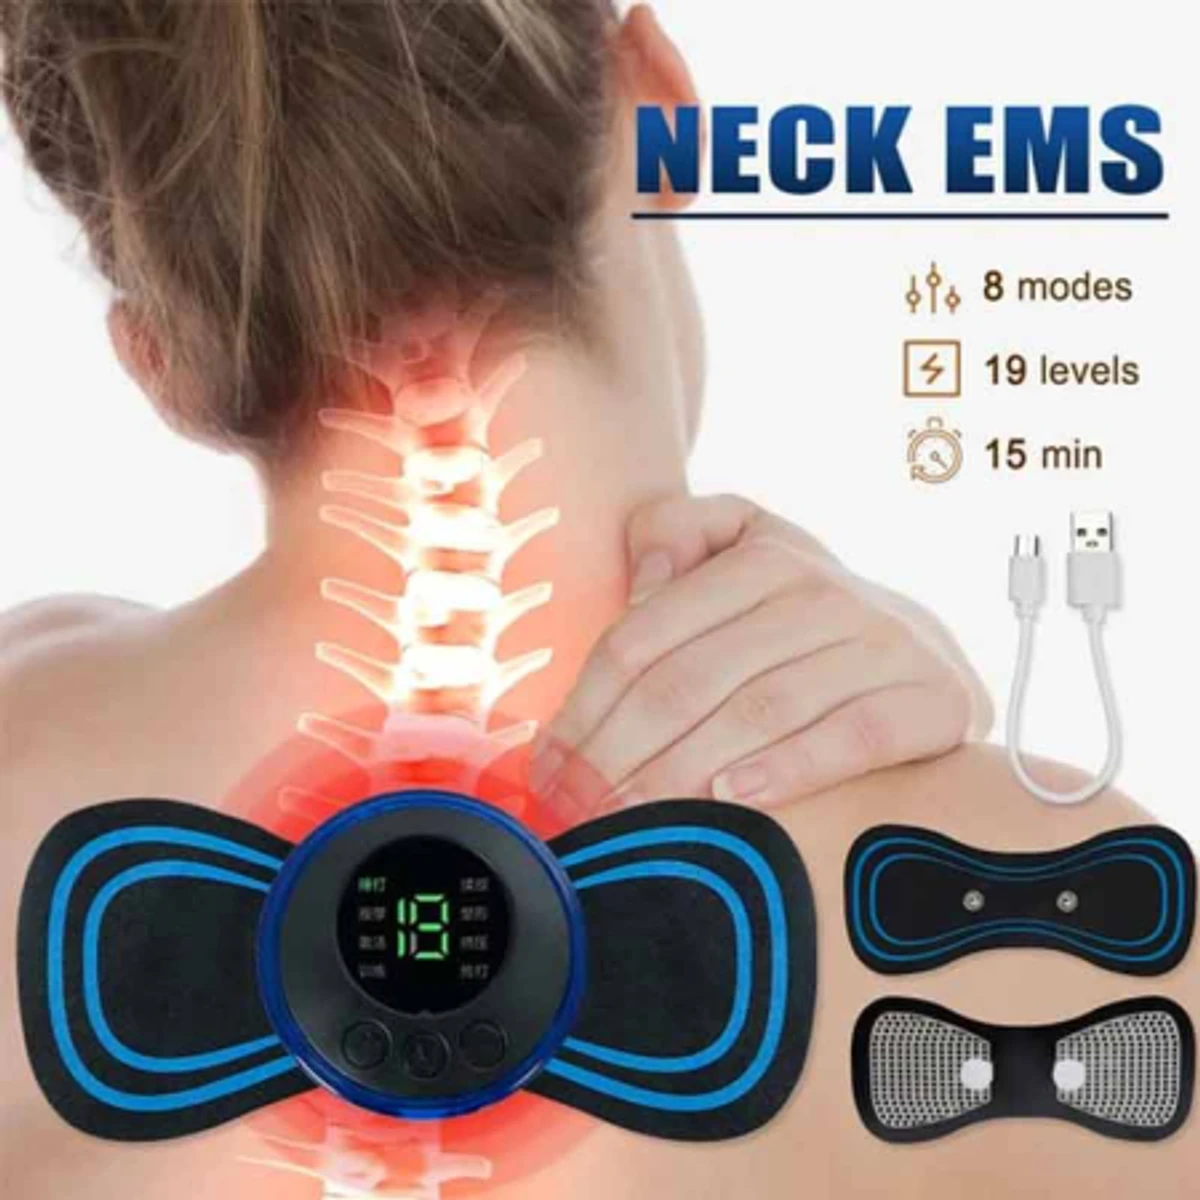 Electric EMS Body Massager Mat/Pad - Neck & Back Therapy